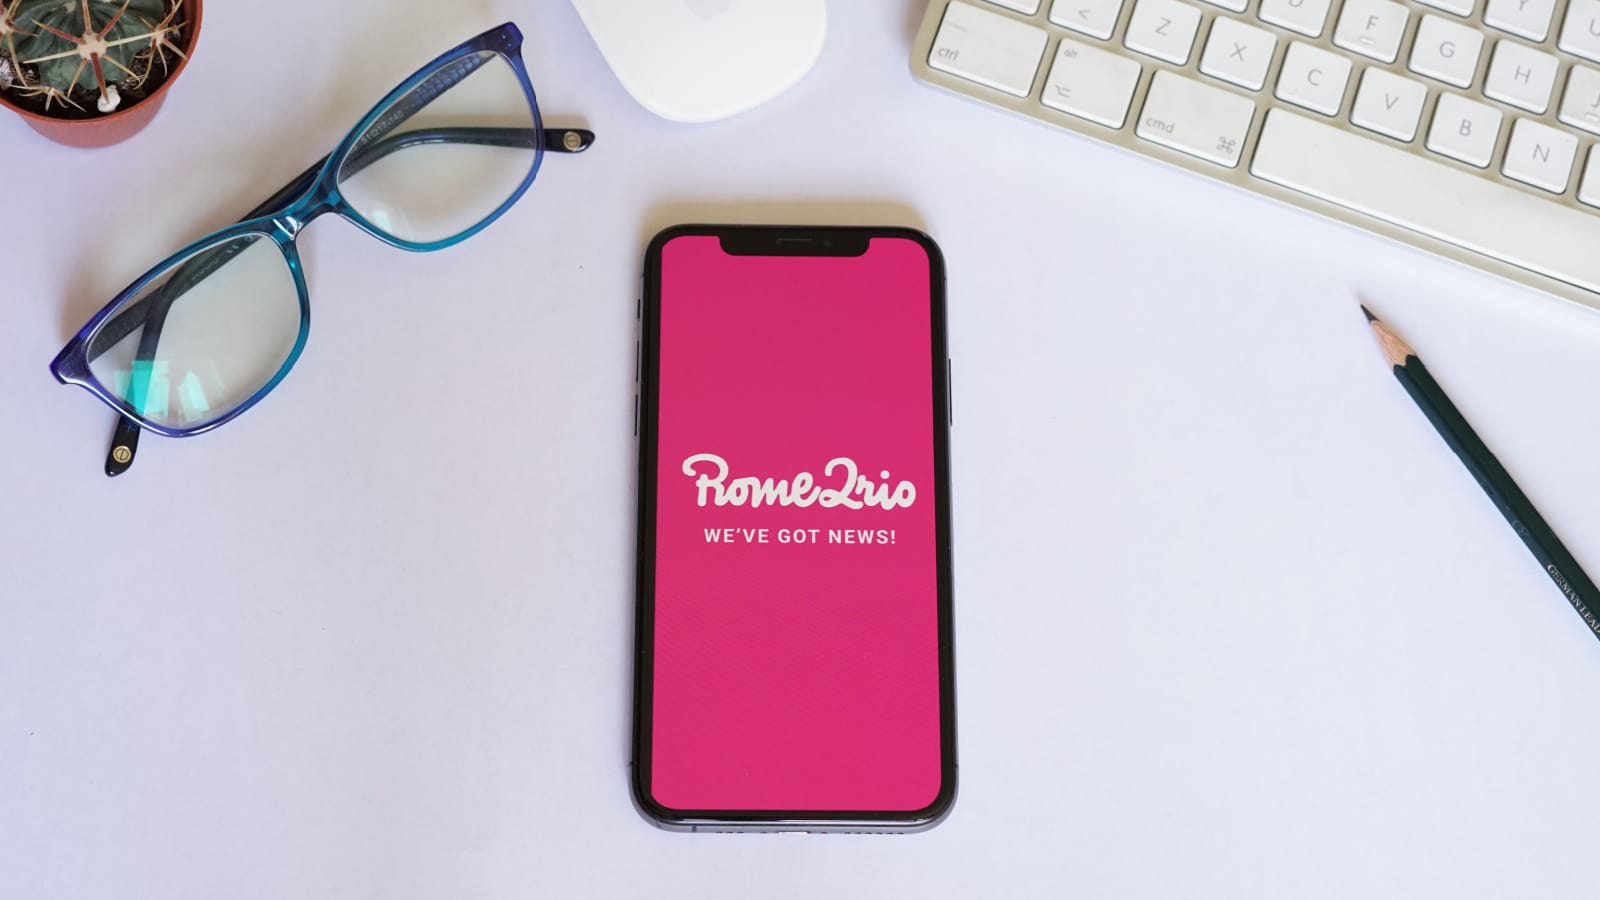 Barcelona, Spain - September 12, 2020; Rome2Rio Iphone Screen with Magic Mouse and Keyboard. Rome2rio is an online multimodal transport search engine. #Rome2rio